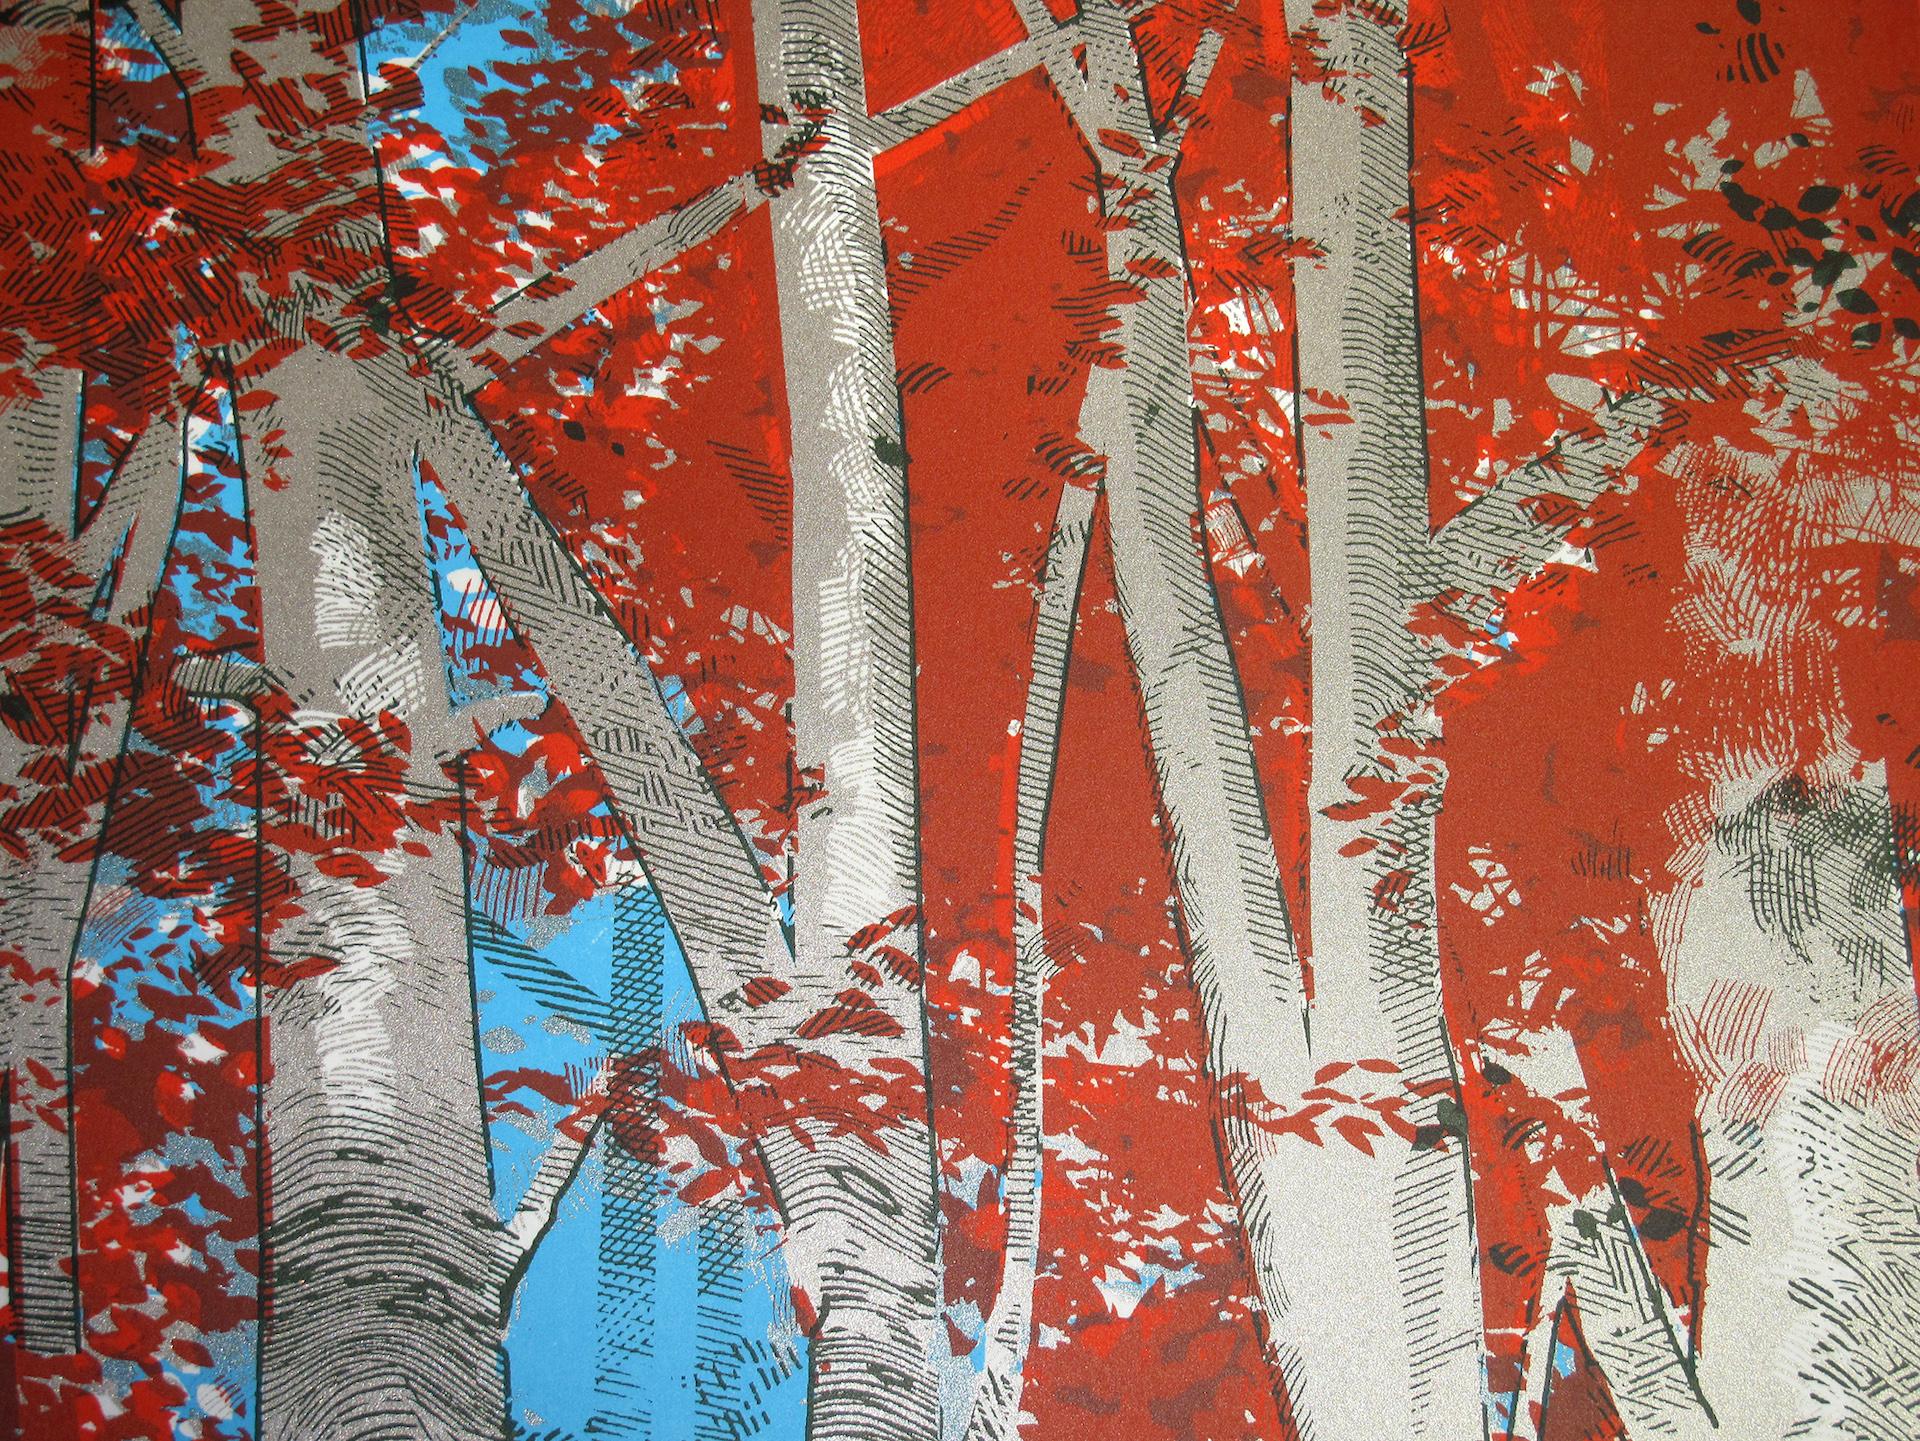 Woodland Birch is a limited edition print by Chris Keegan. Created from five colour layers including metallic silver ink this print is inspired by nature. Forming a dynamic style of vertical tree trunks and an orange leafy covering top. Adding